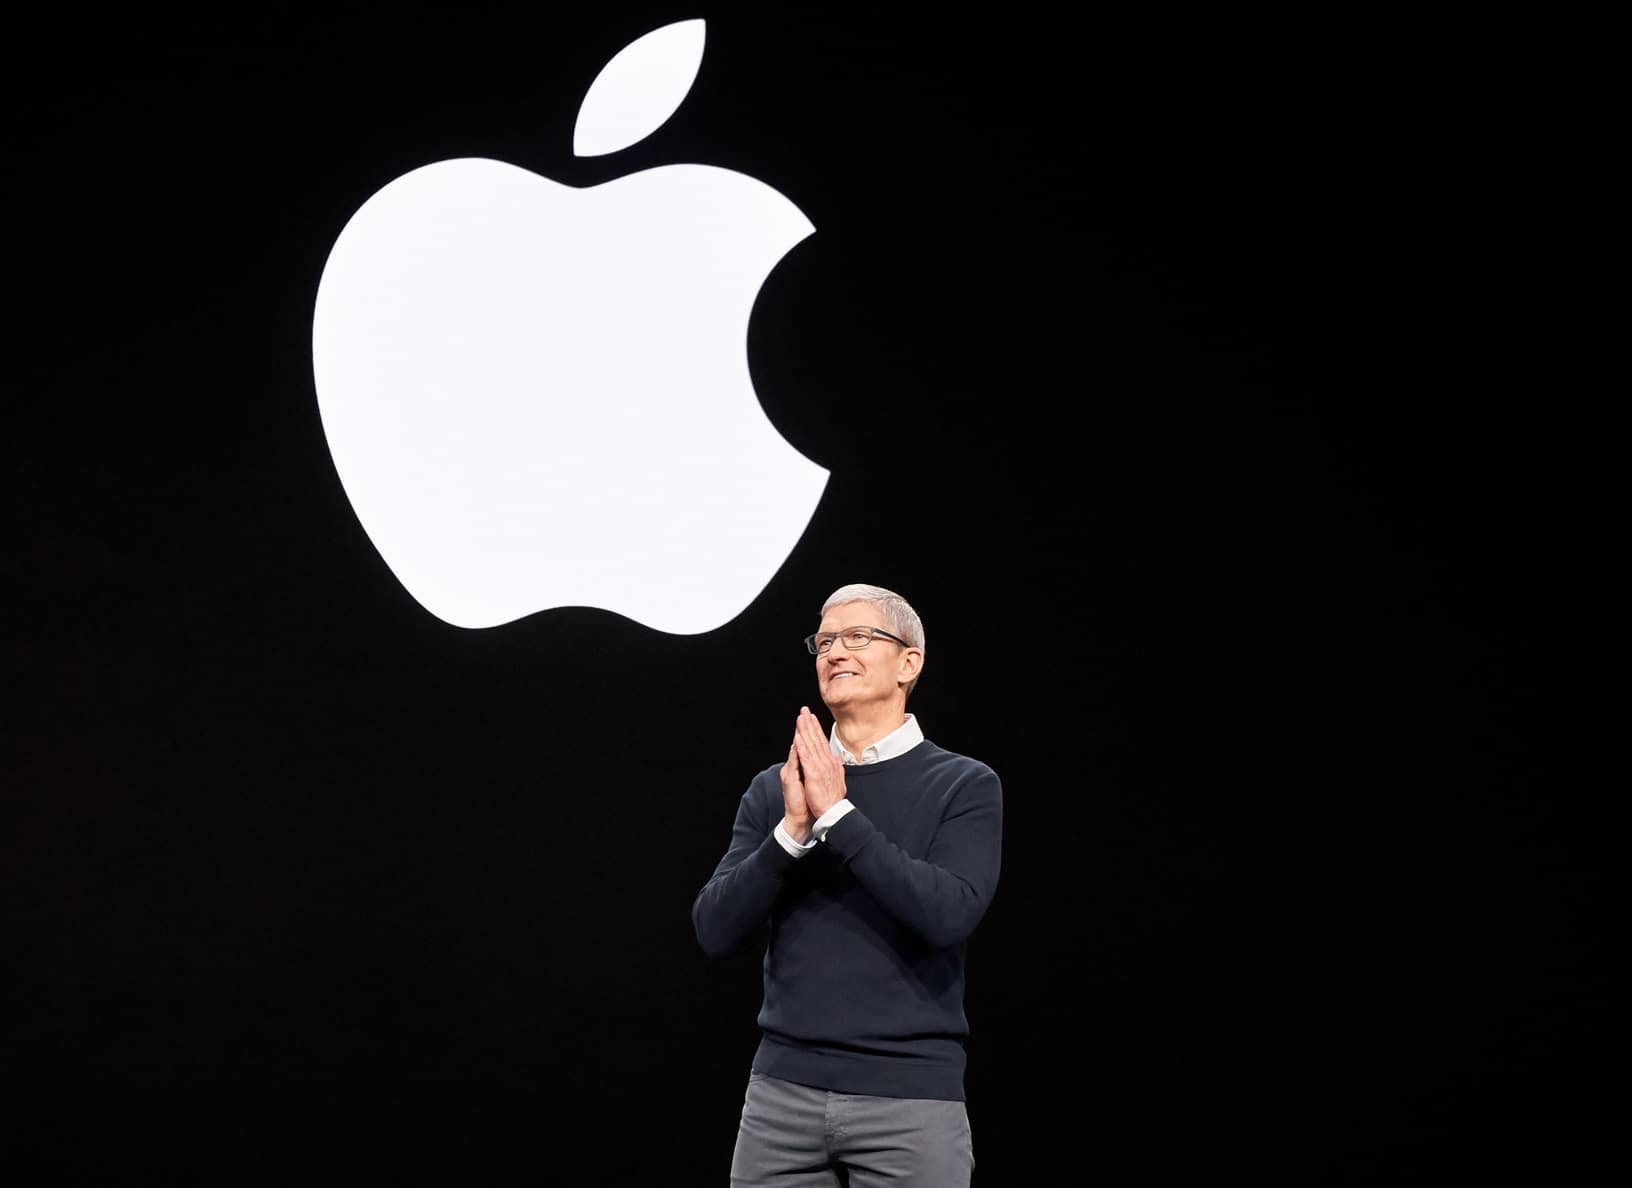 WWDC2020 to be Virtual Only – My Take